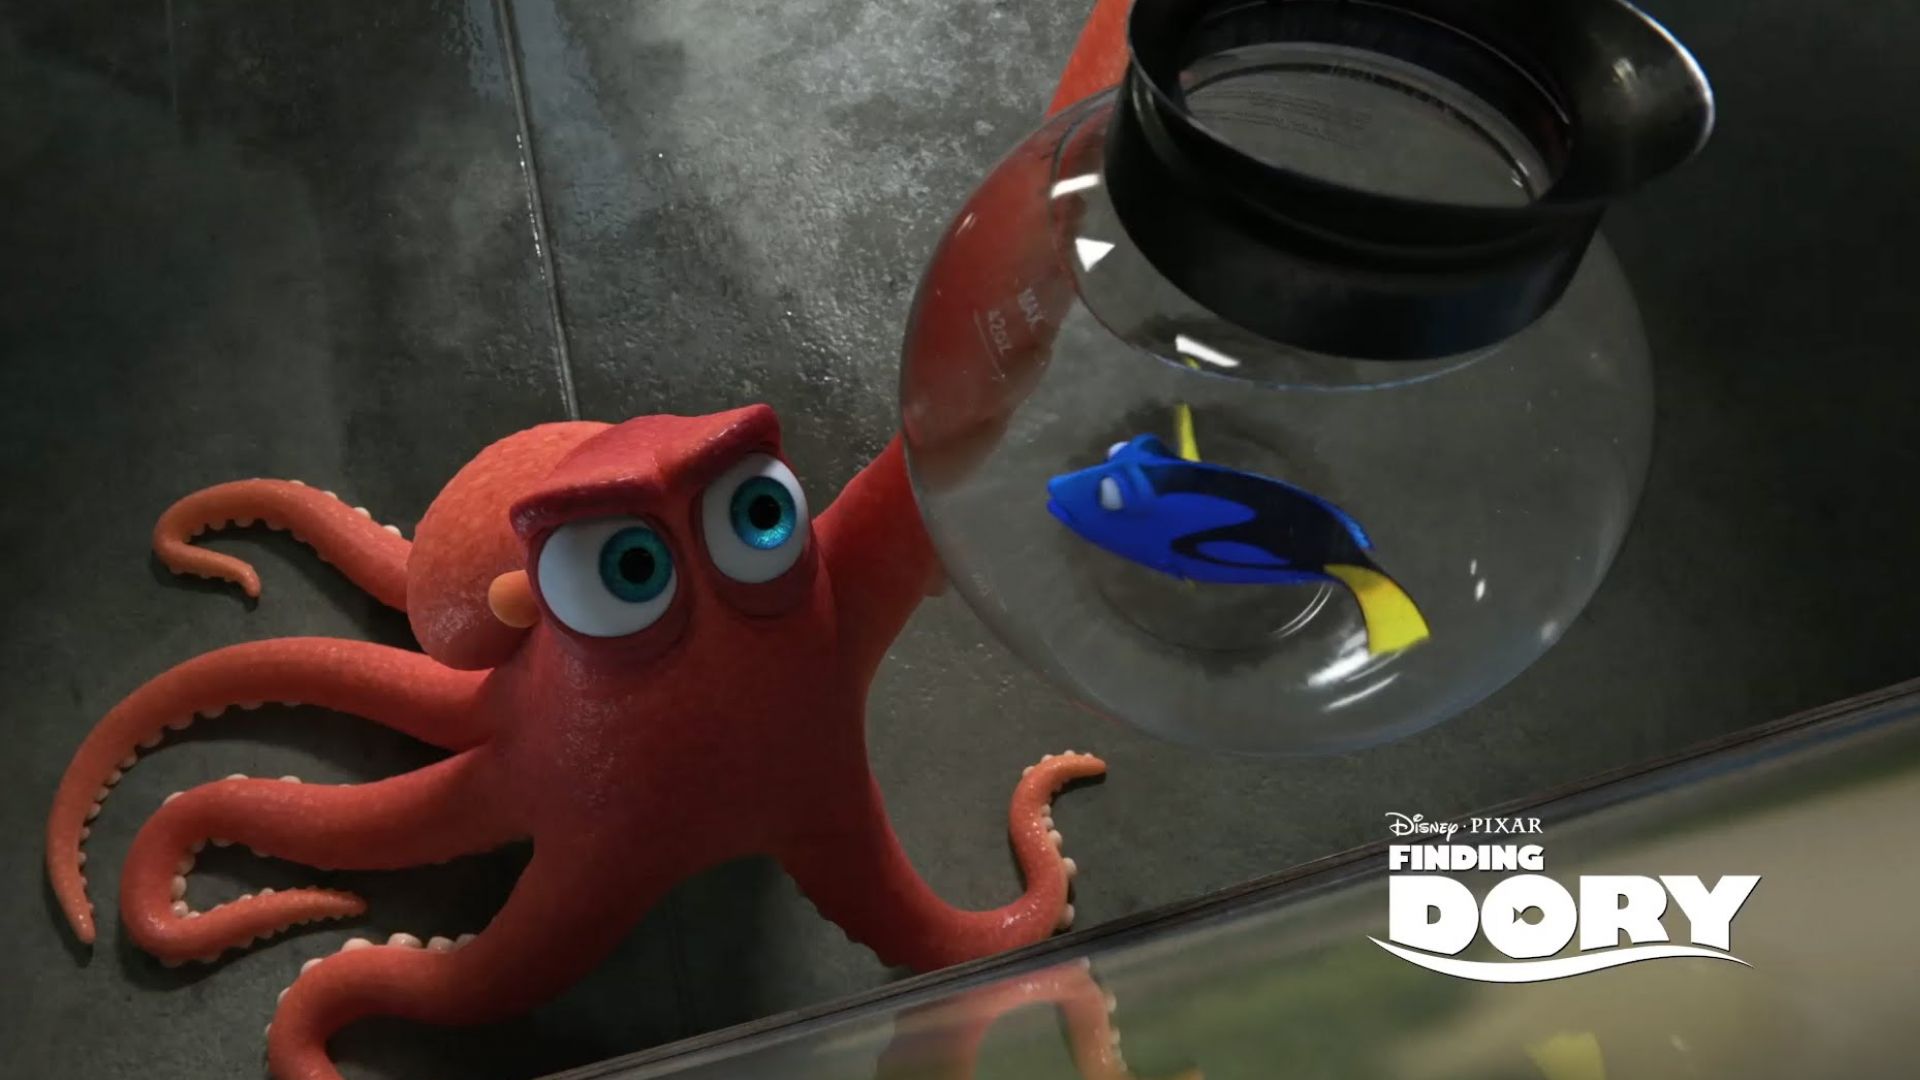 The Ultimate Pixar Easter Egg Unveiled